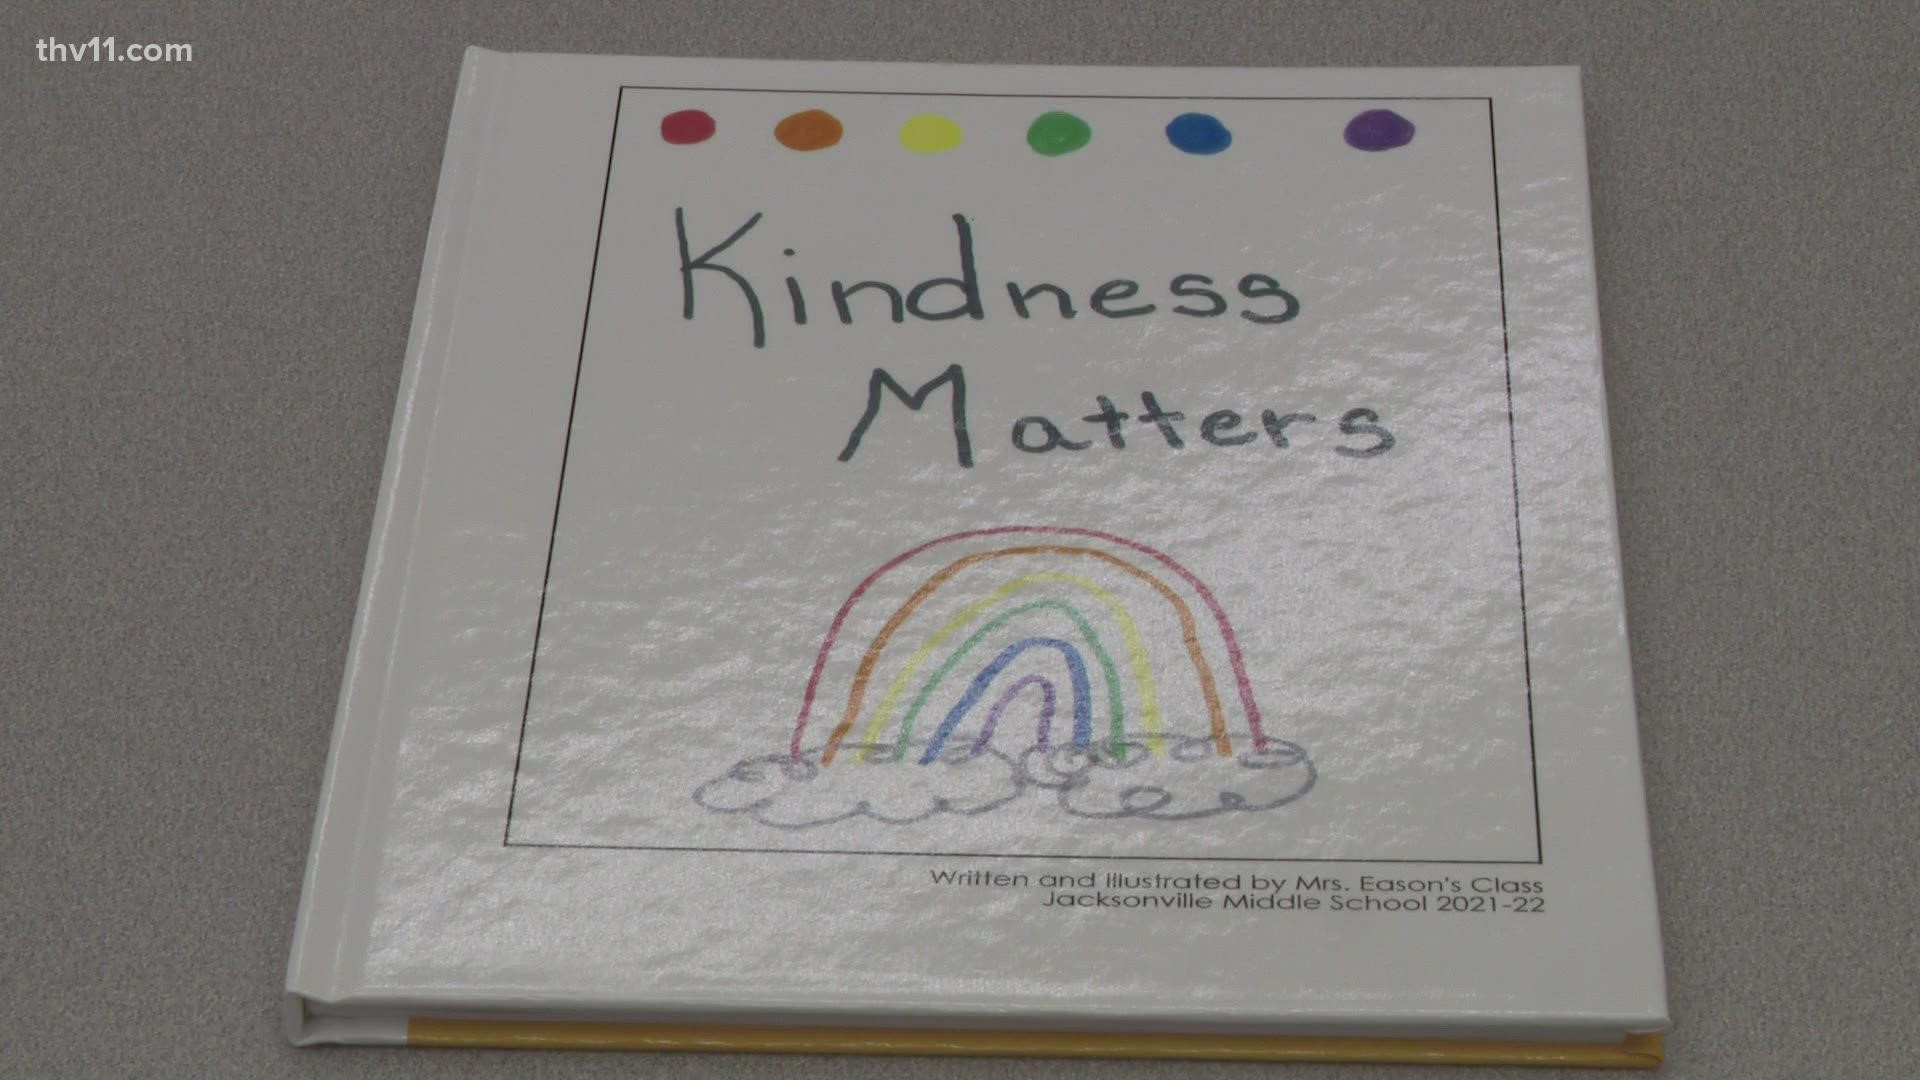 Special education teacher Kathy Eason in Jacksonville had her sixth, seventh, and eighth grade students write and illustrate Kindness Matters.